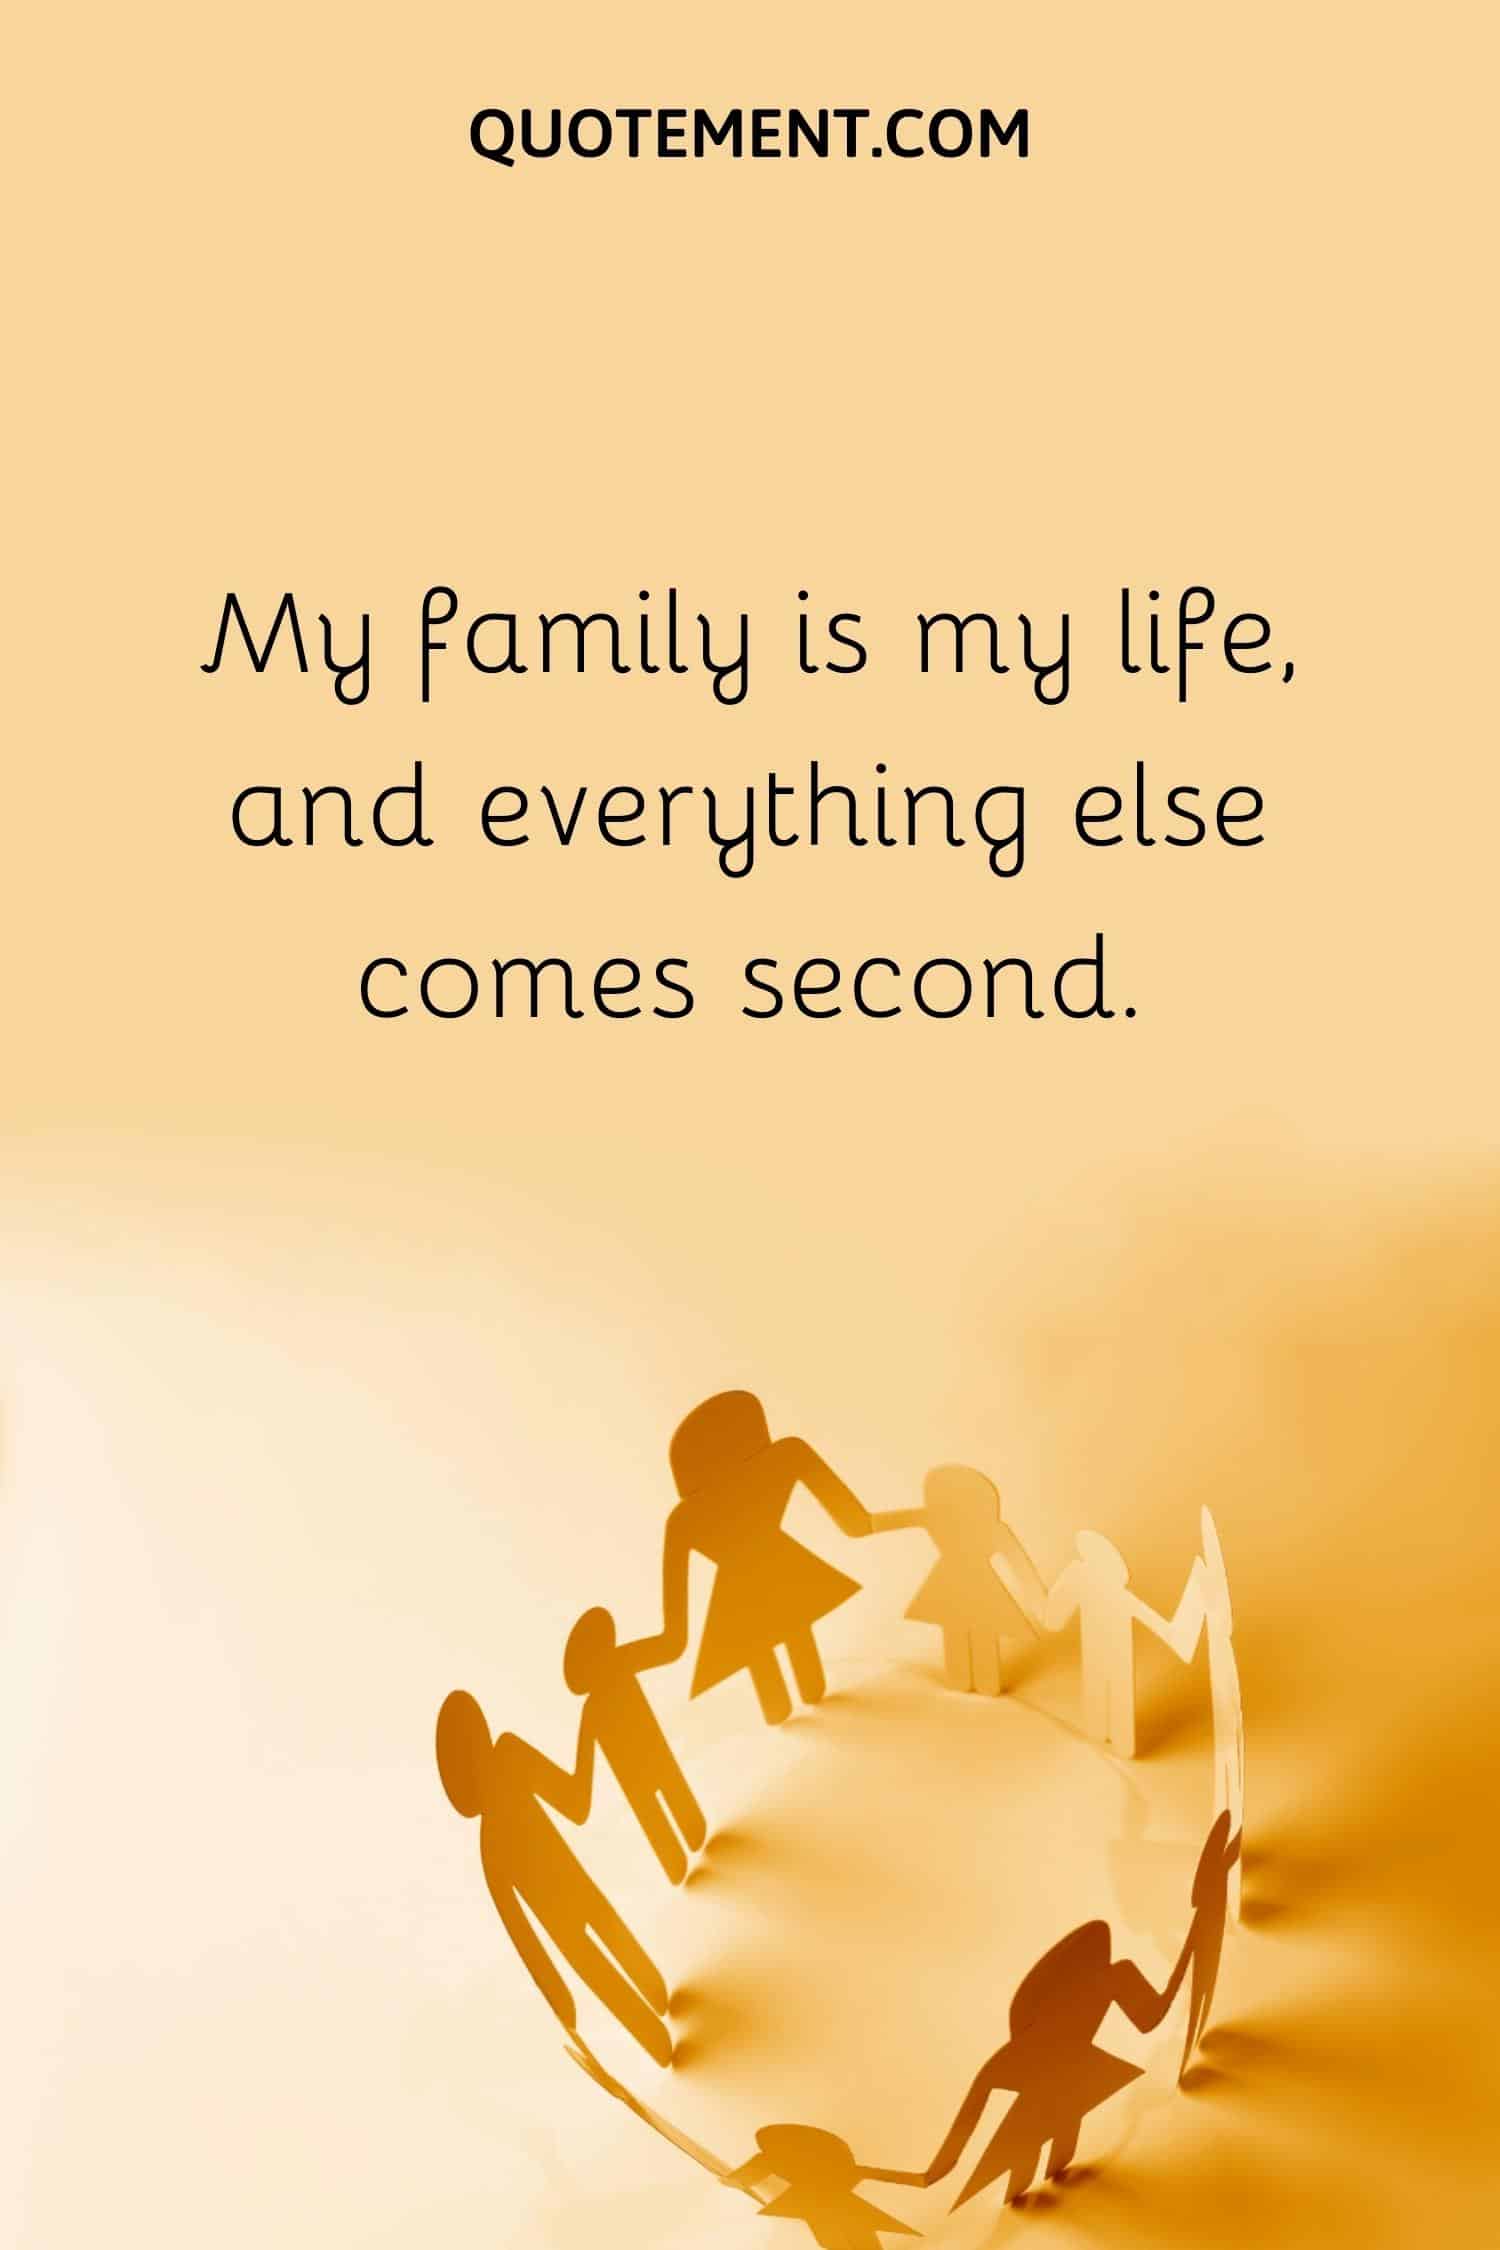 My family is my life, and everything else comes second.